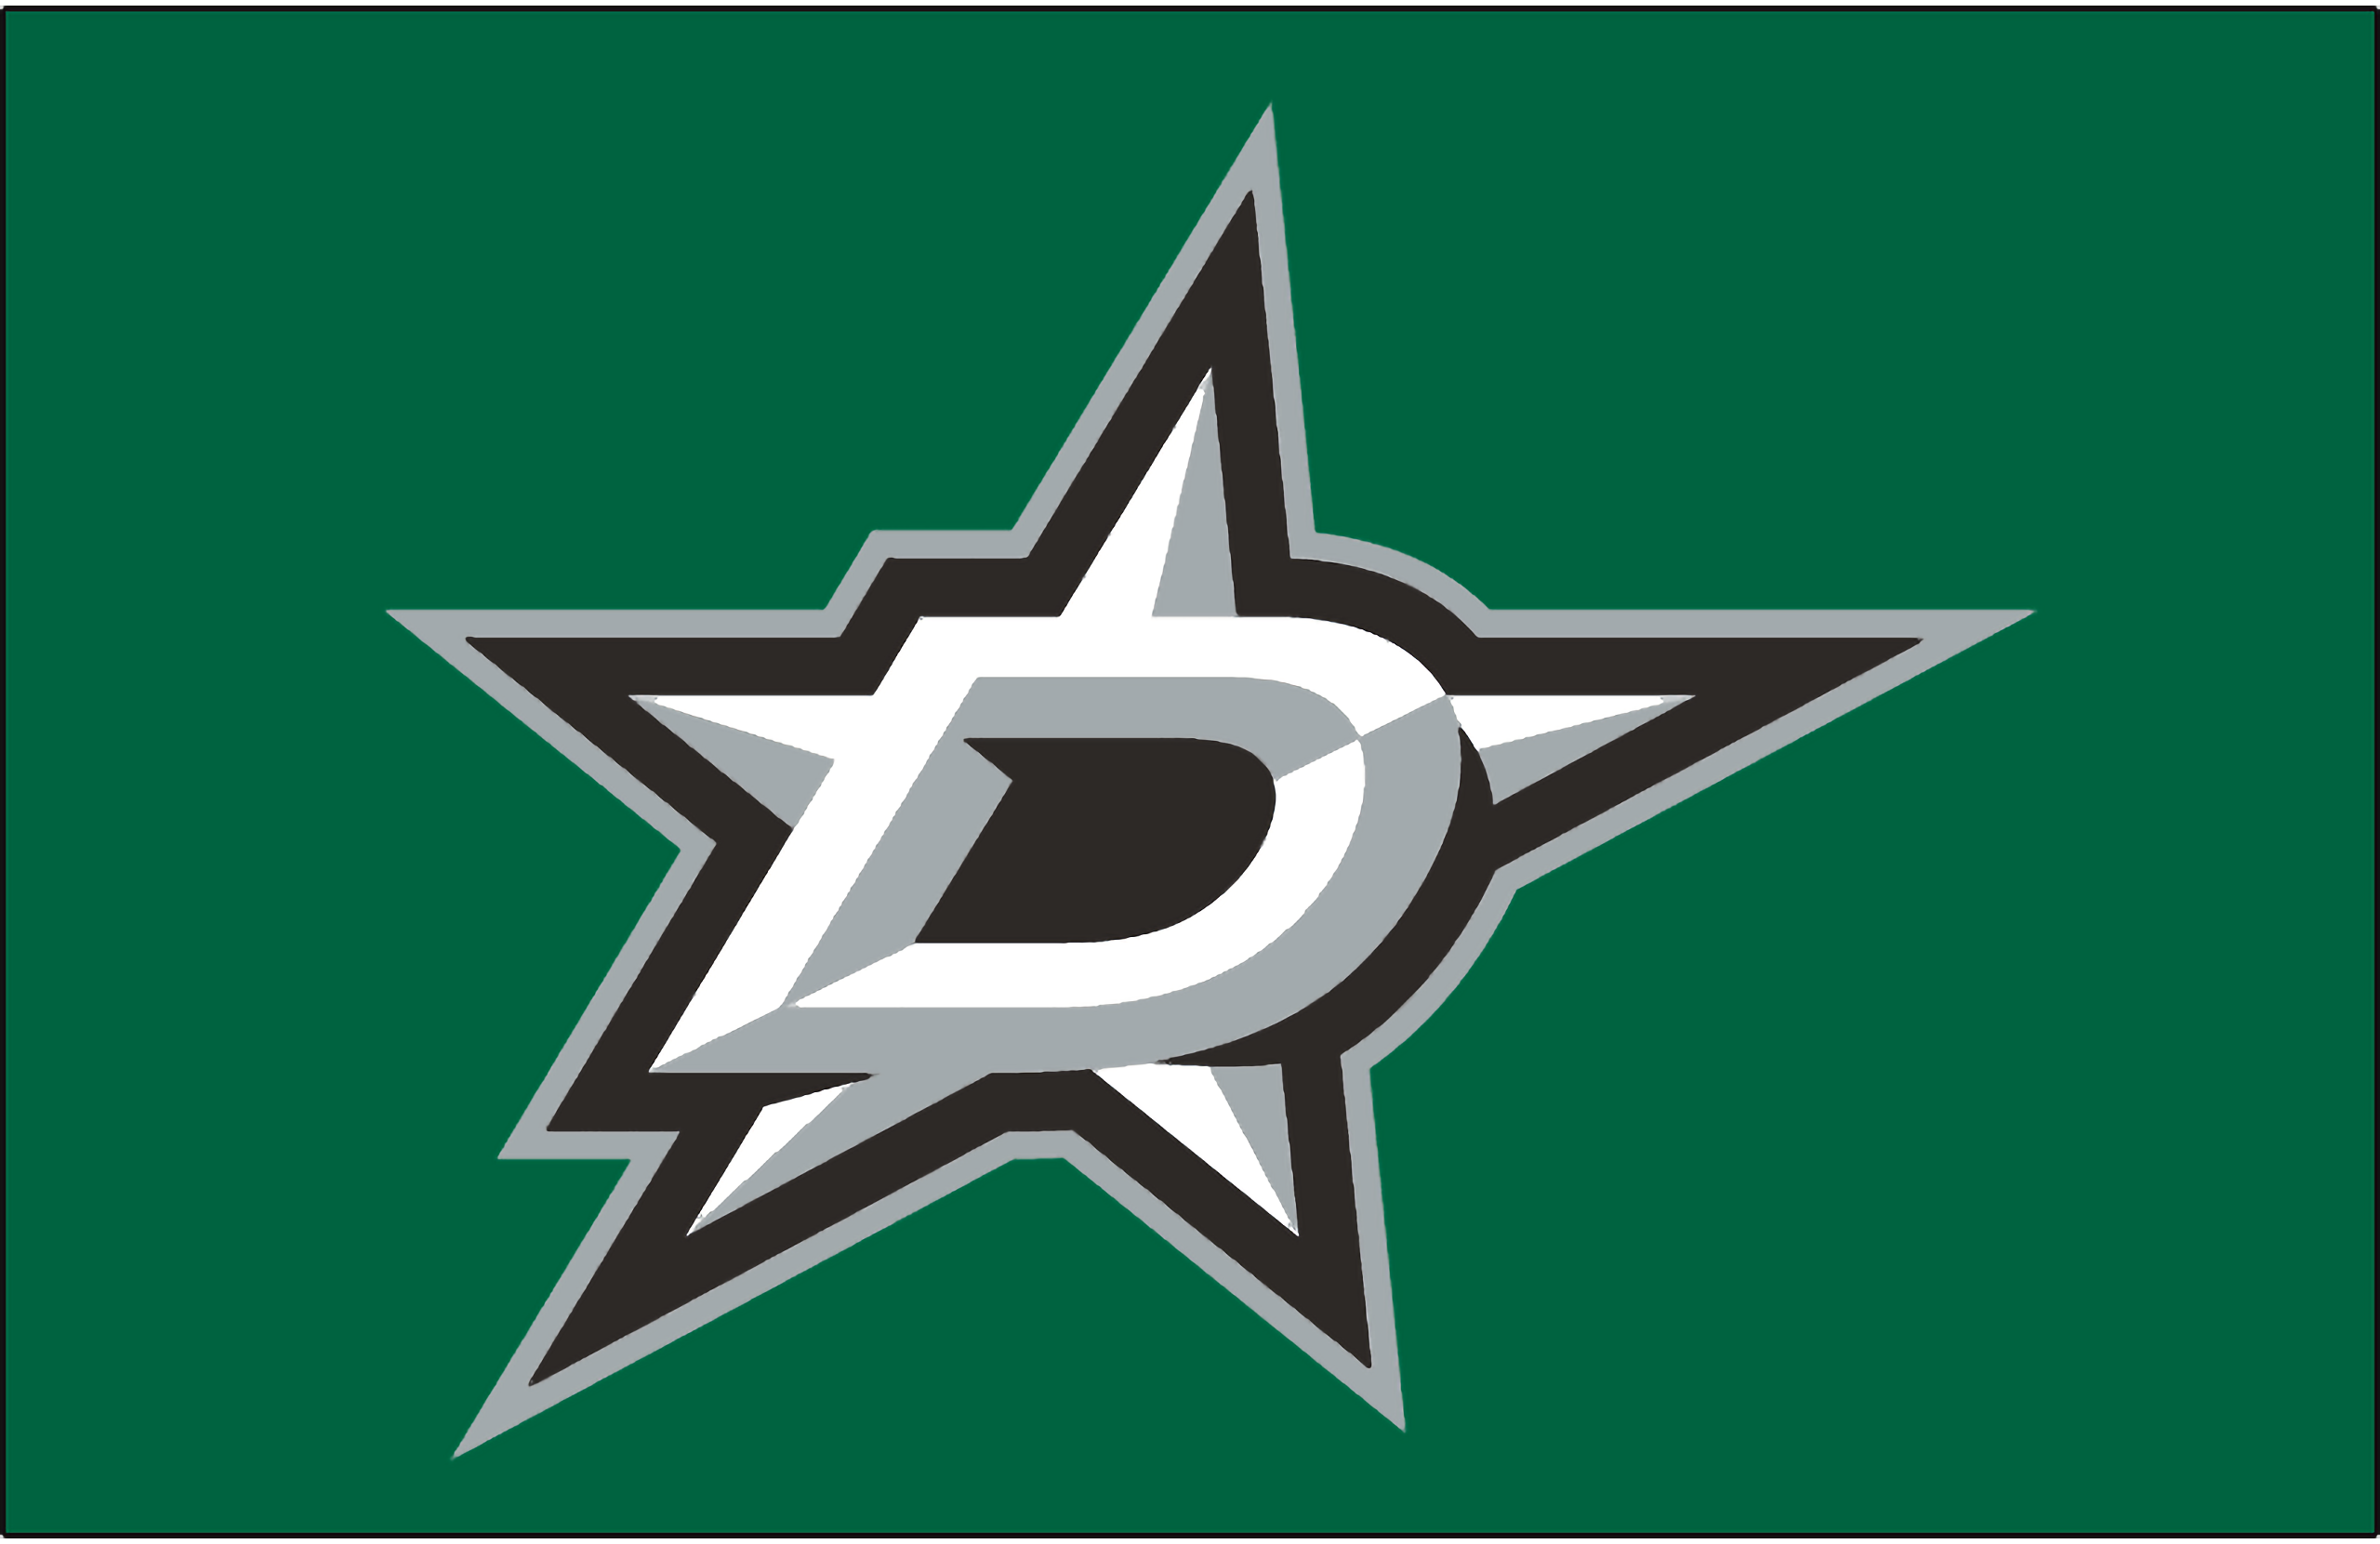 Dallas Stars Wallpapers and Background Images   stmednet